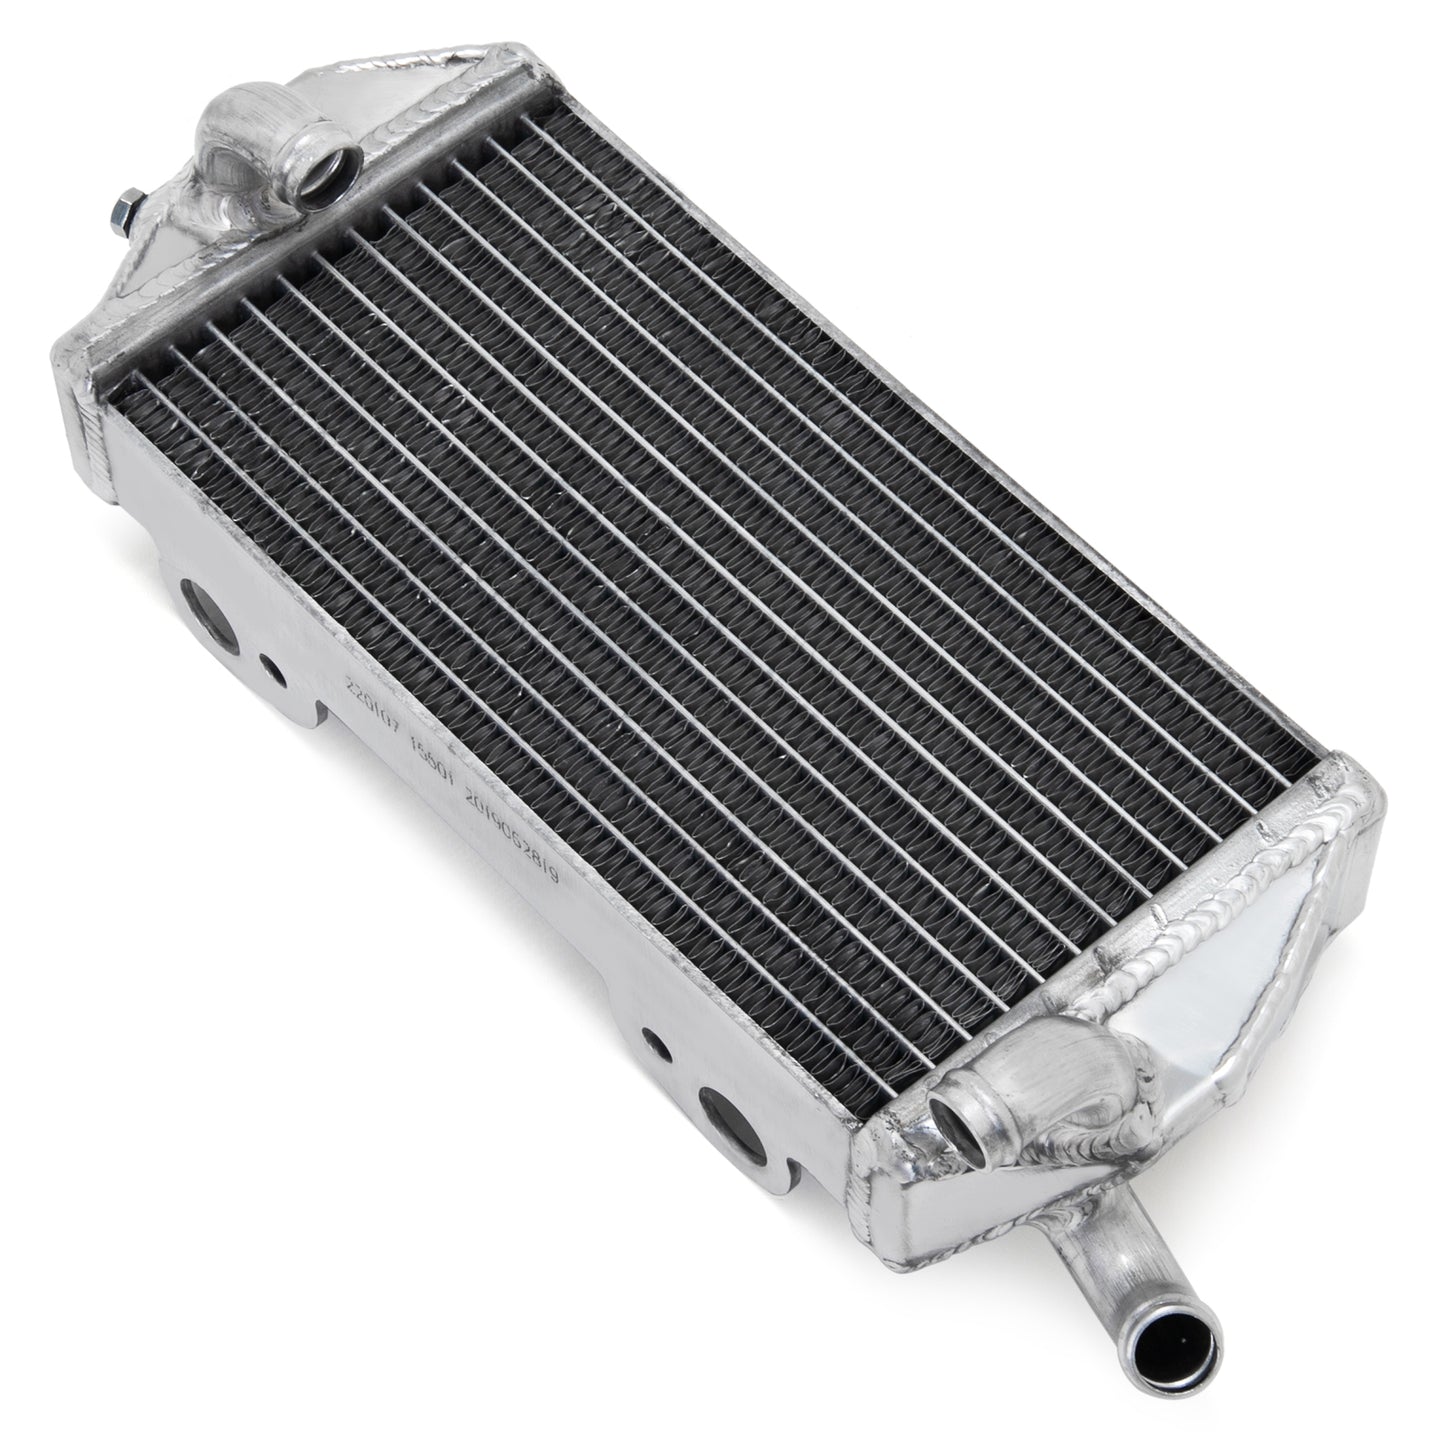 For Beta RR125 LC 2T 2018-2019 / RR200 LC 2T 2019 Aluminum Engine Water Cooling Radiators